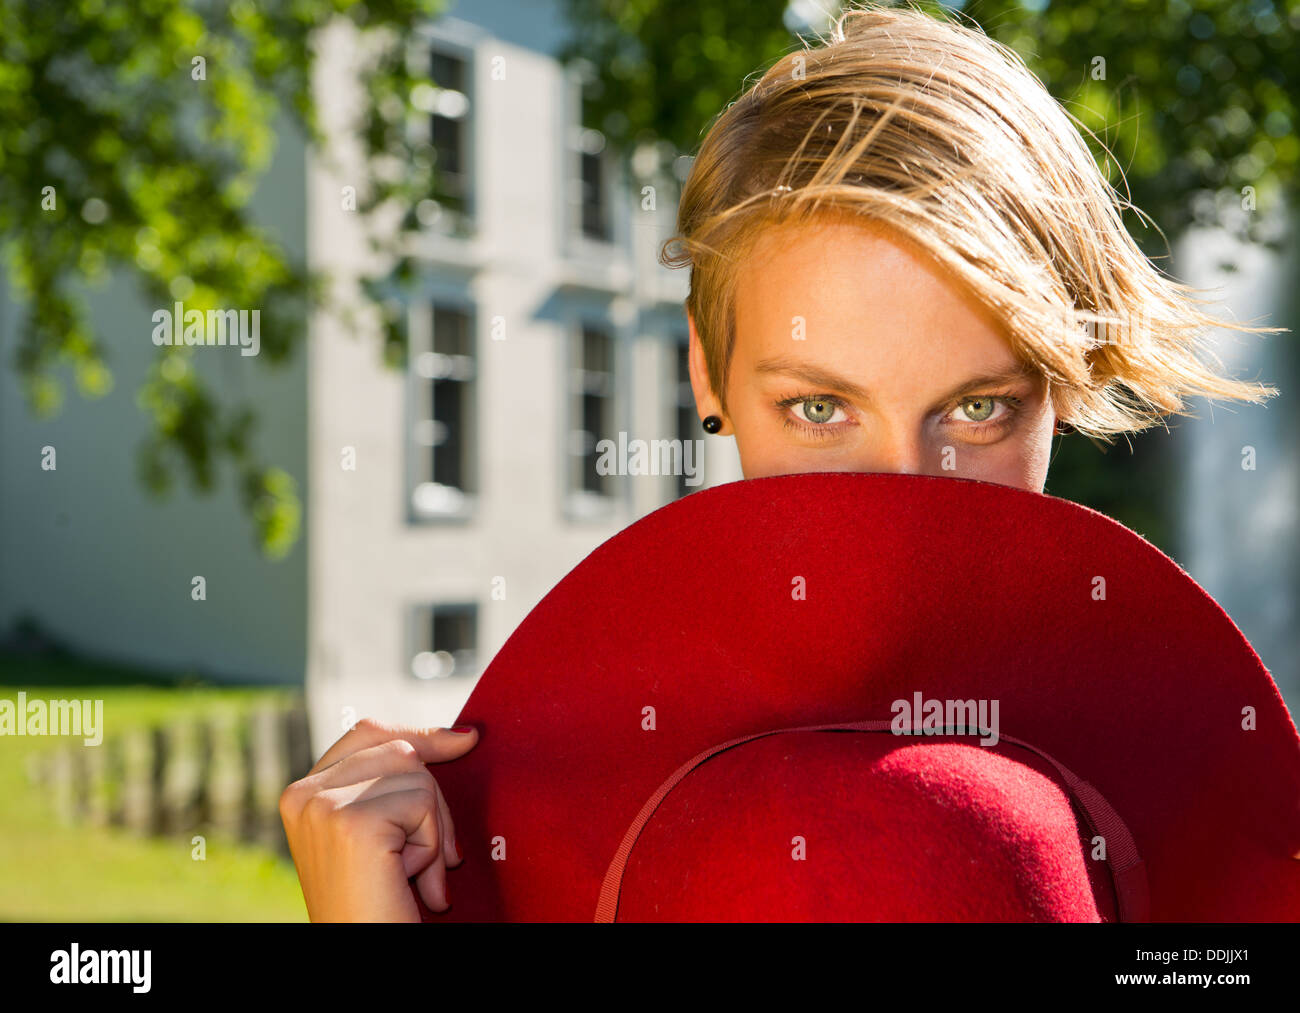 Young woman partially hiding behind a red, felt hat on a warm summer day Stock Photo